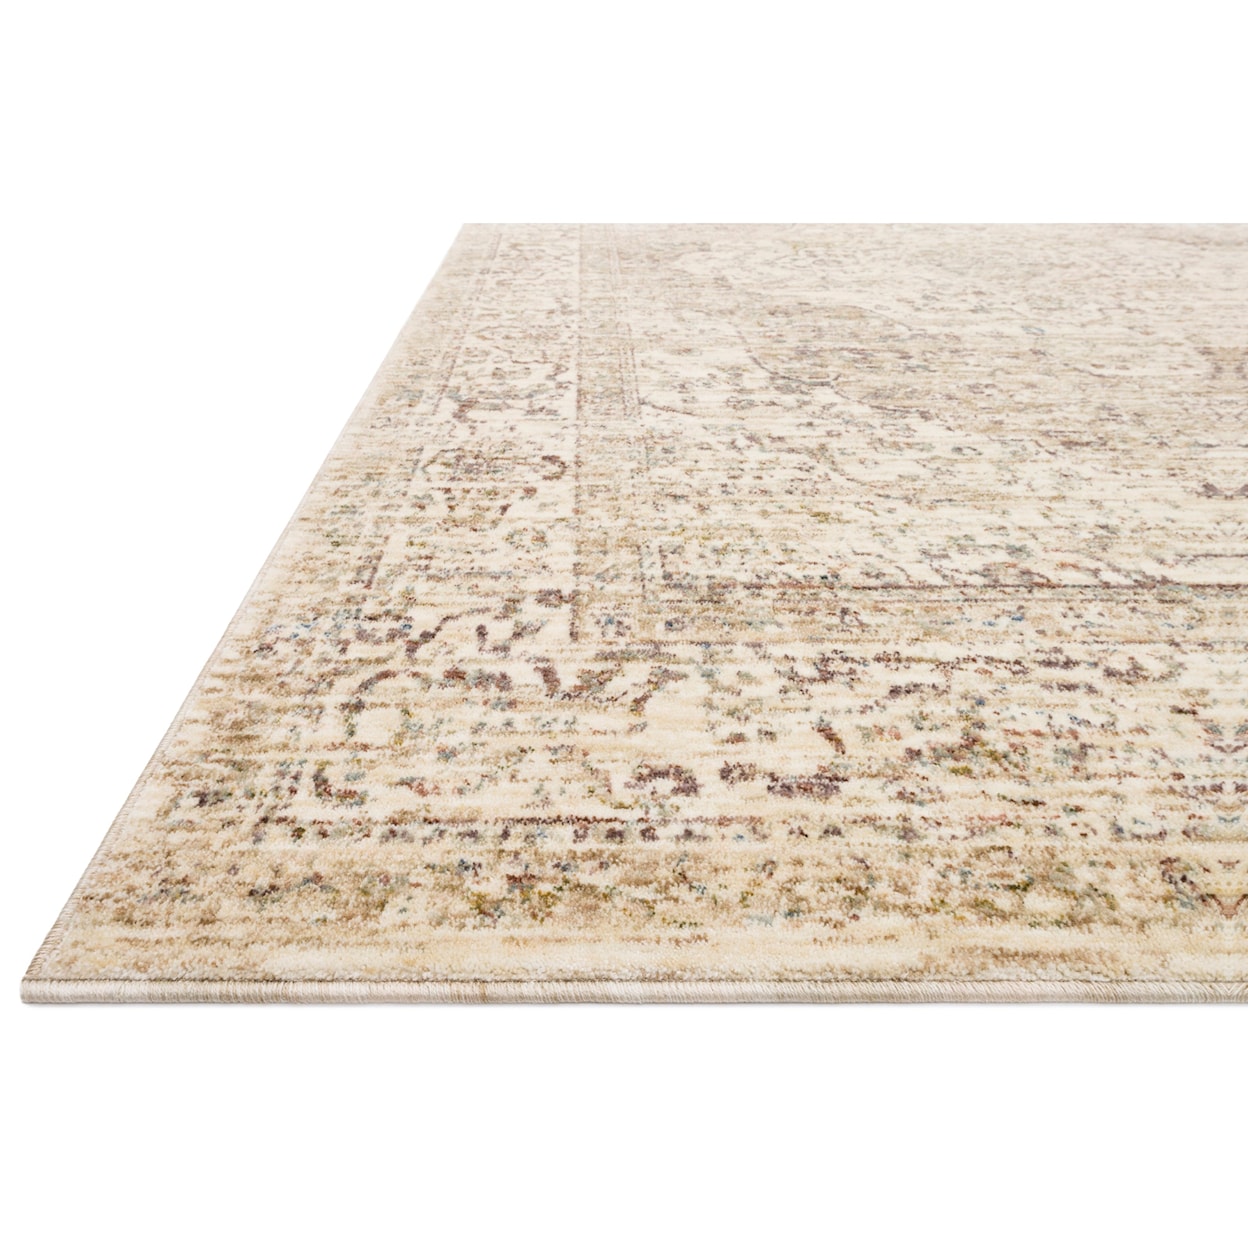 Reeds Rugs Revere 1'6" x 1'6"  Ivory / Berry Rug